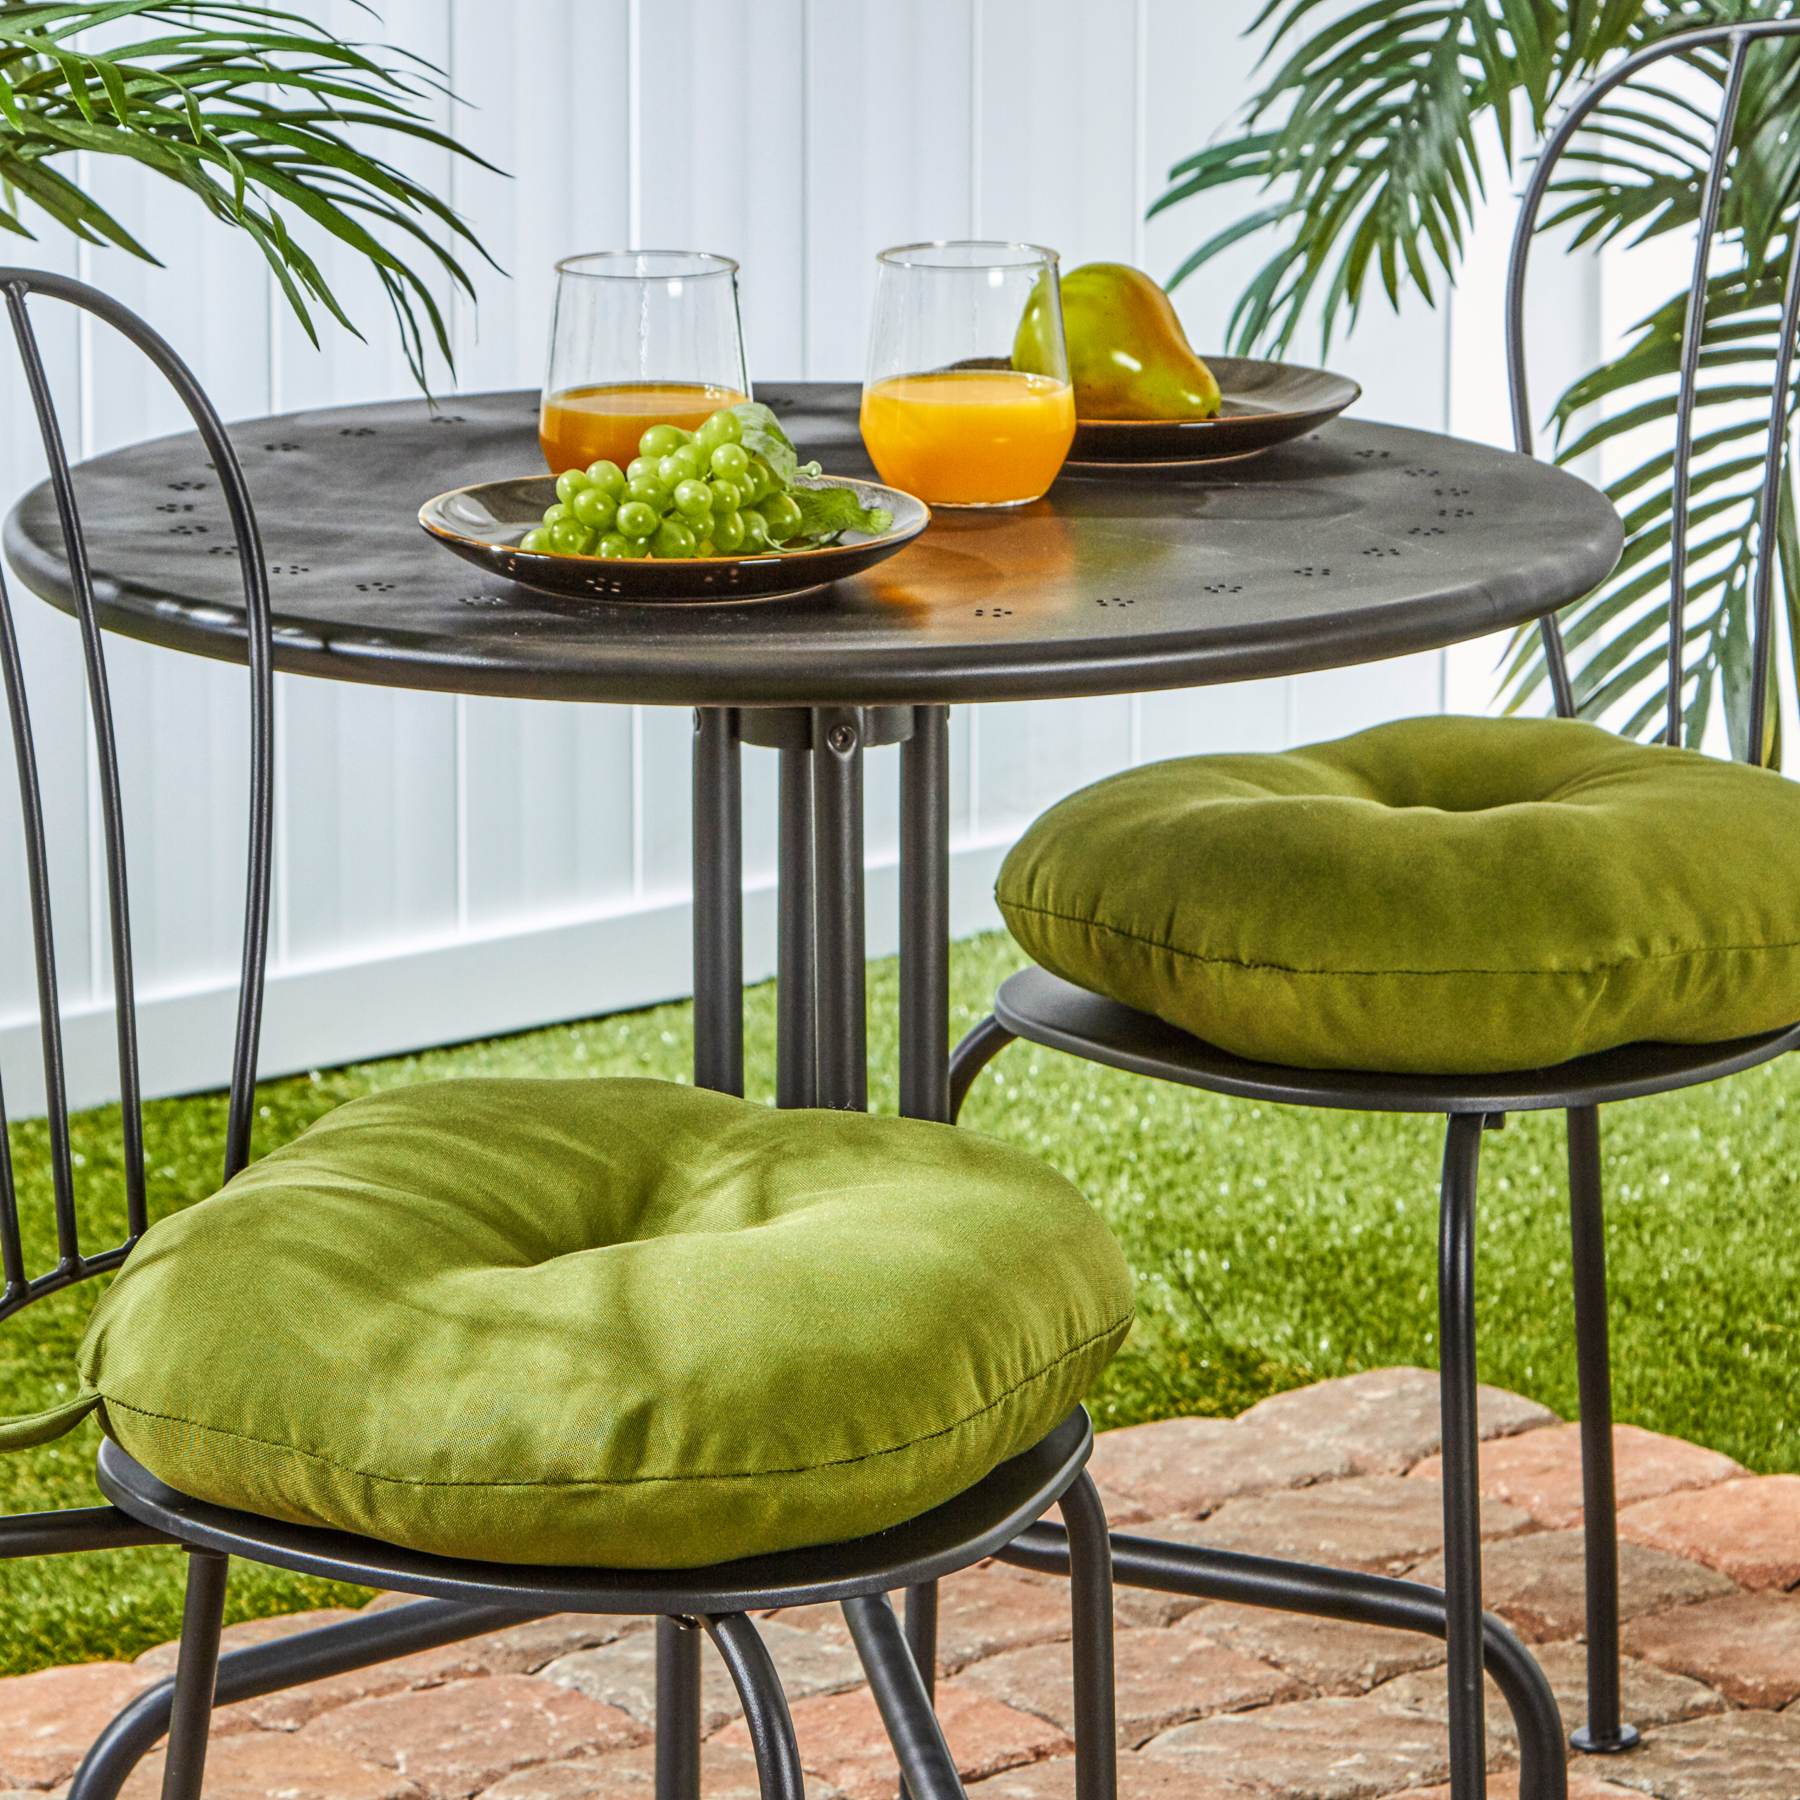 Greendale Home Fashions Summerside Green 15 in. Round Outdoor Reversible Bistro Seat Cushion (Set of 2) - image 4 of 6